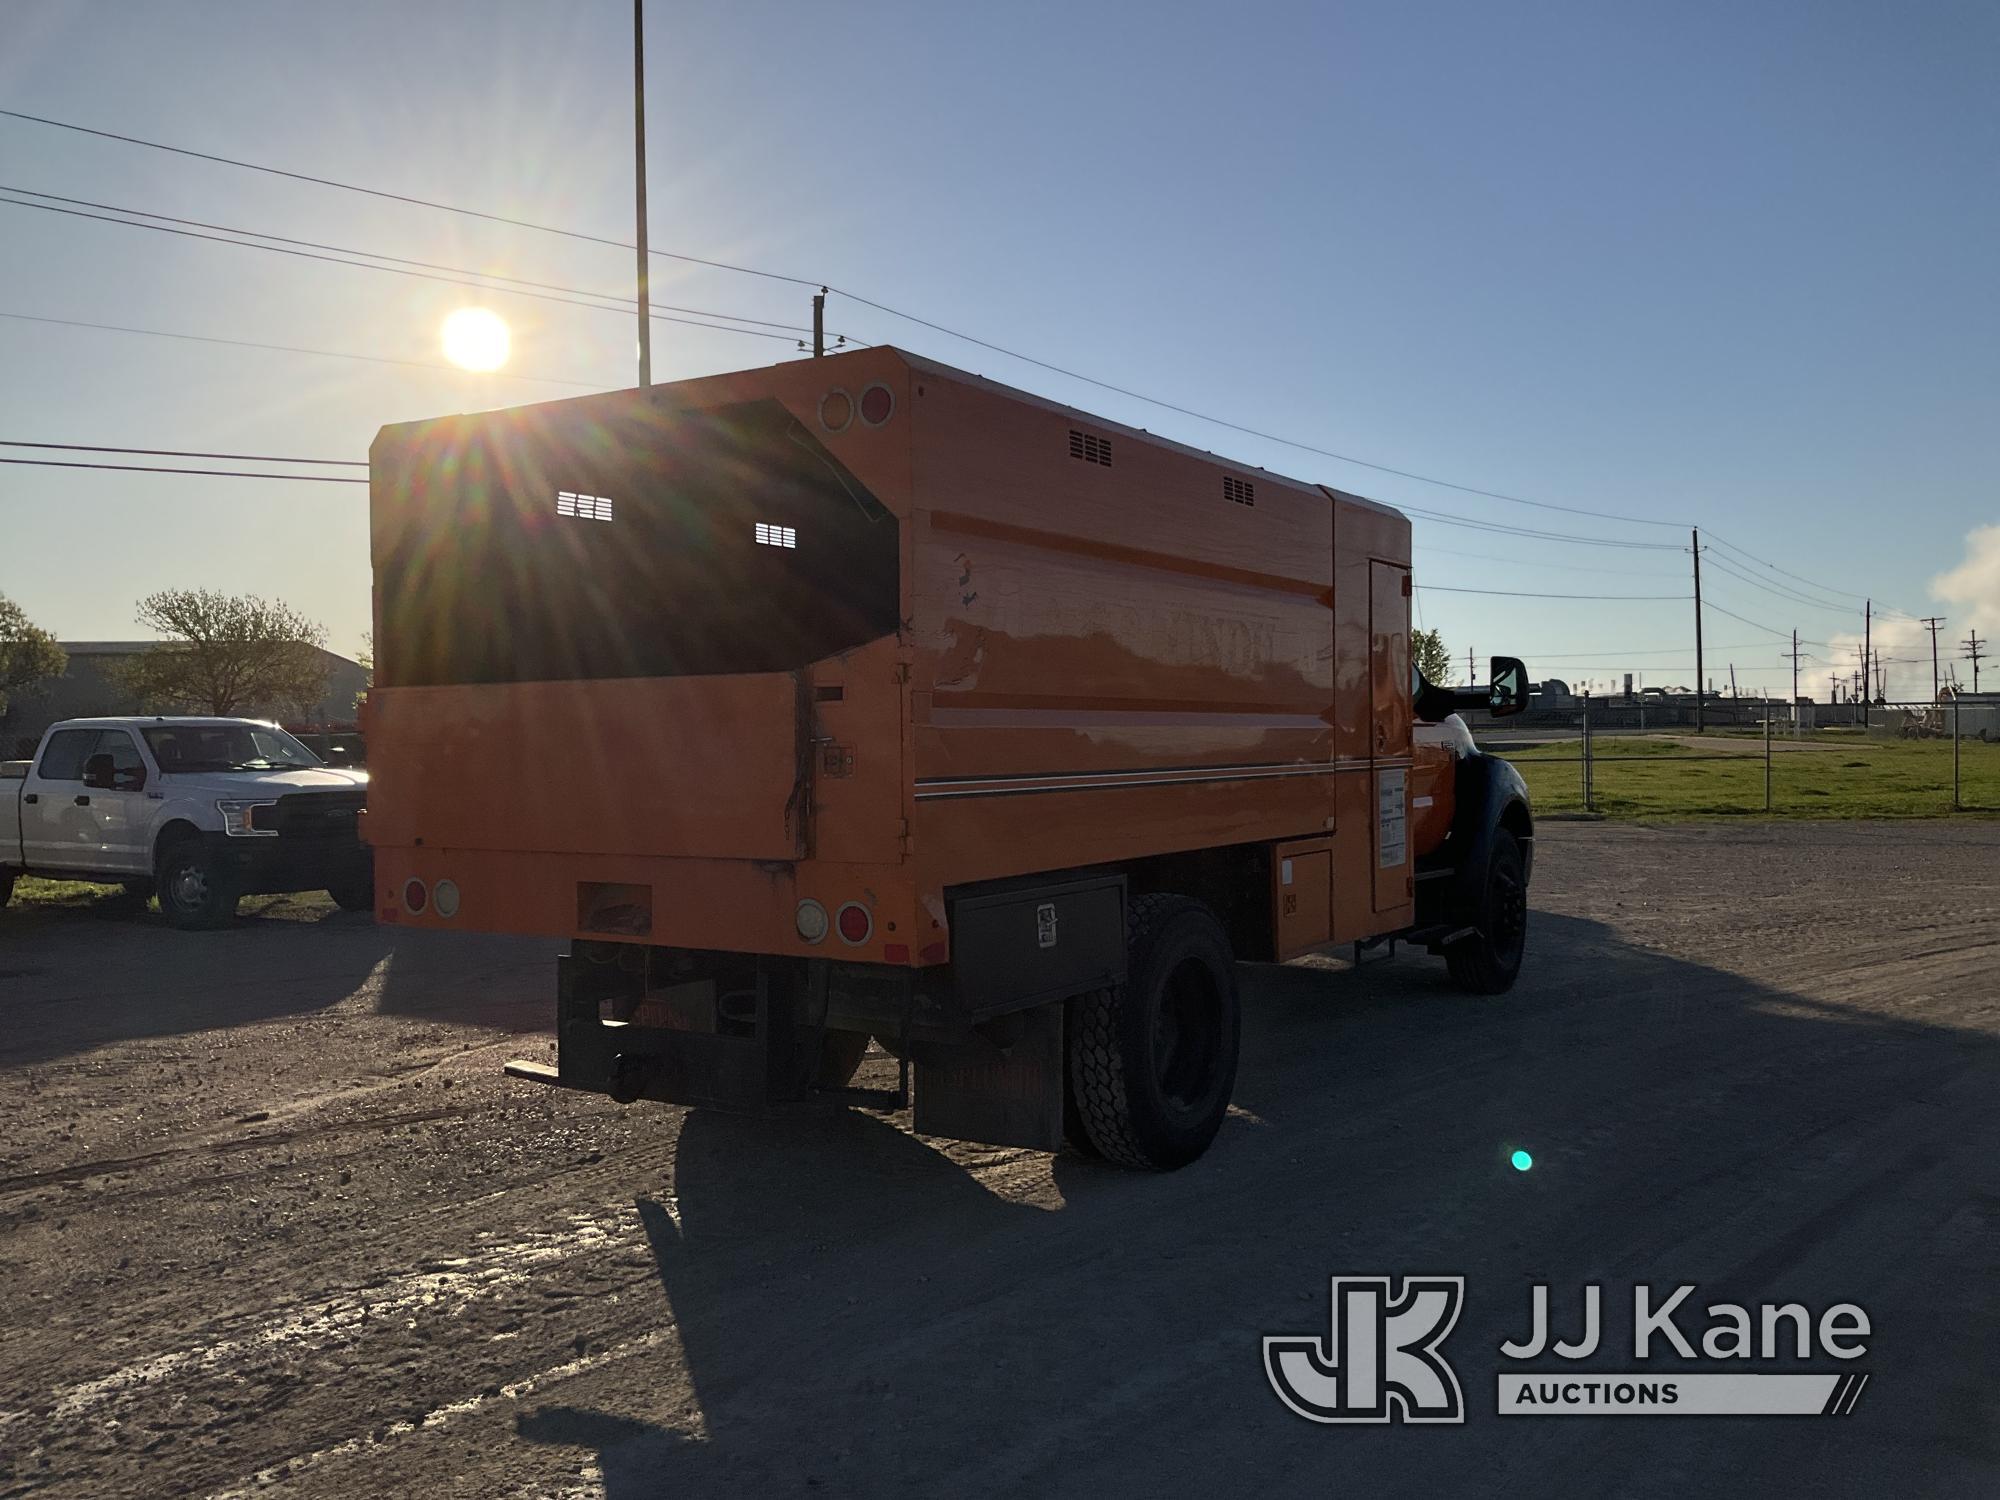 (Waxahachie, TX) 2013 Ford F650 Chipper Dump Truck Runs & Moves) (ABS Light On) (Seller States: Need